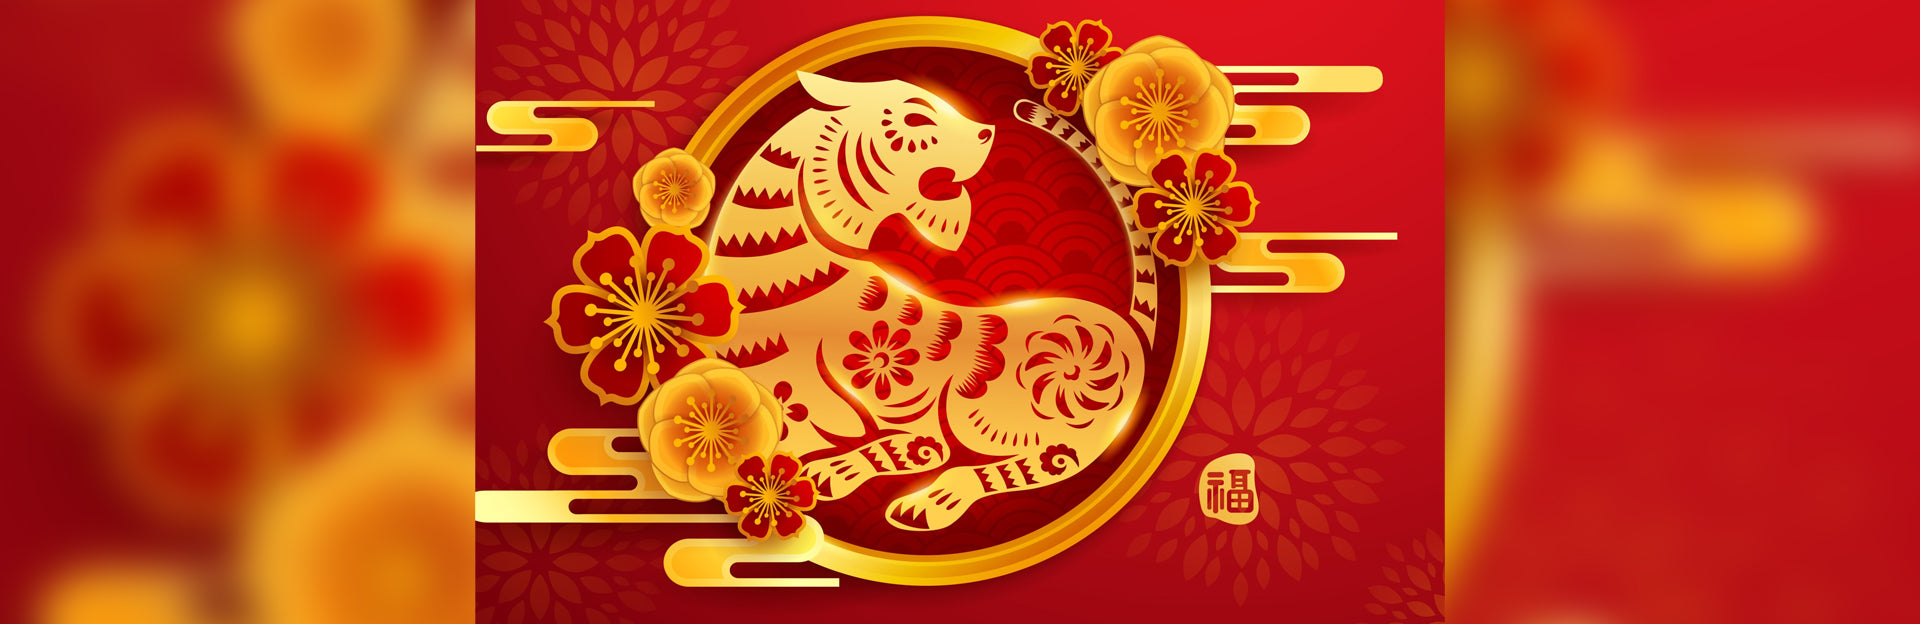 Best Lunar New Year Red Pockets Year of the Tiger